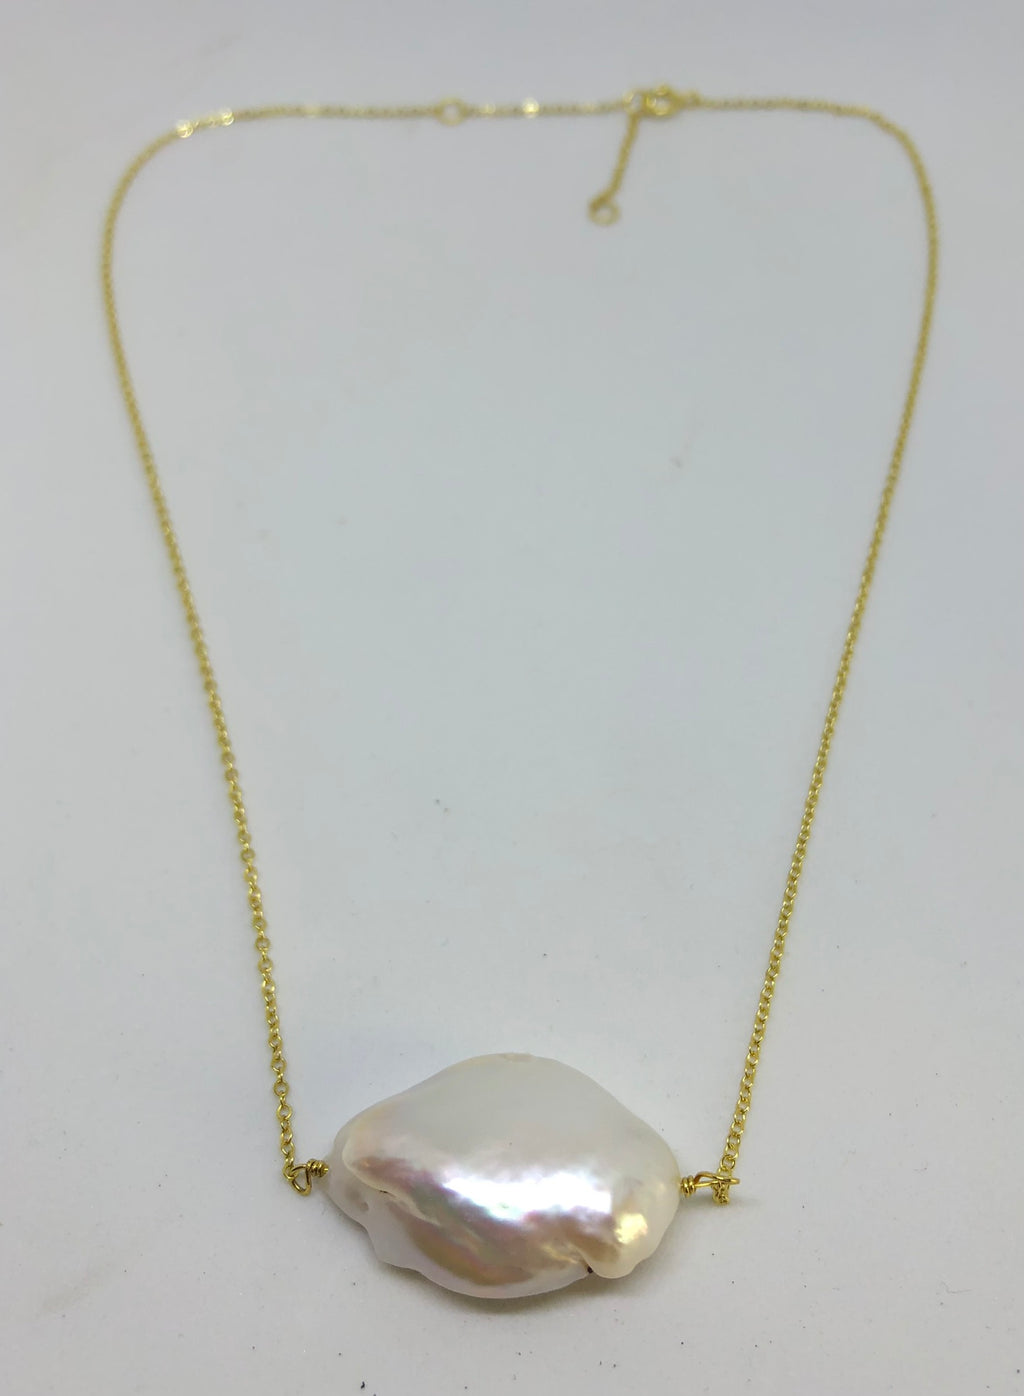 Free Form Large Pearl Necklace on Gold Chain 16"